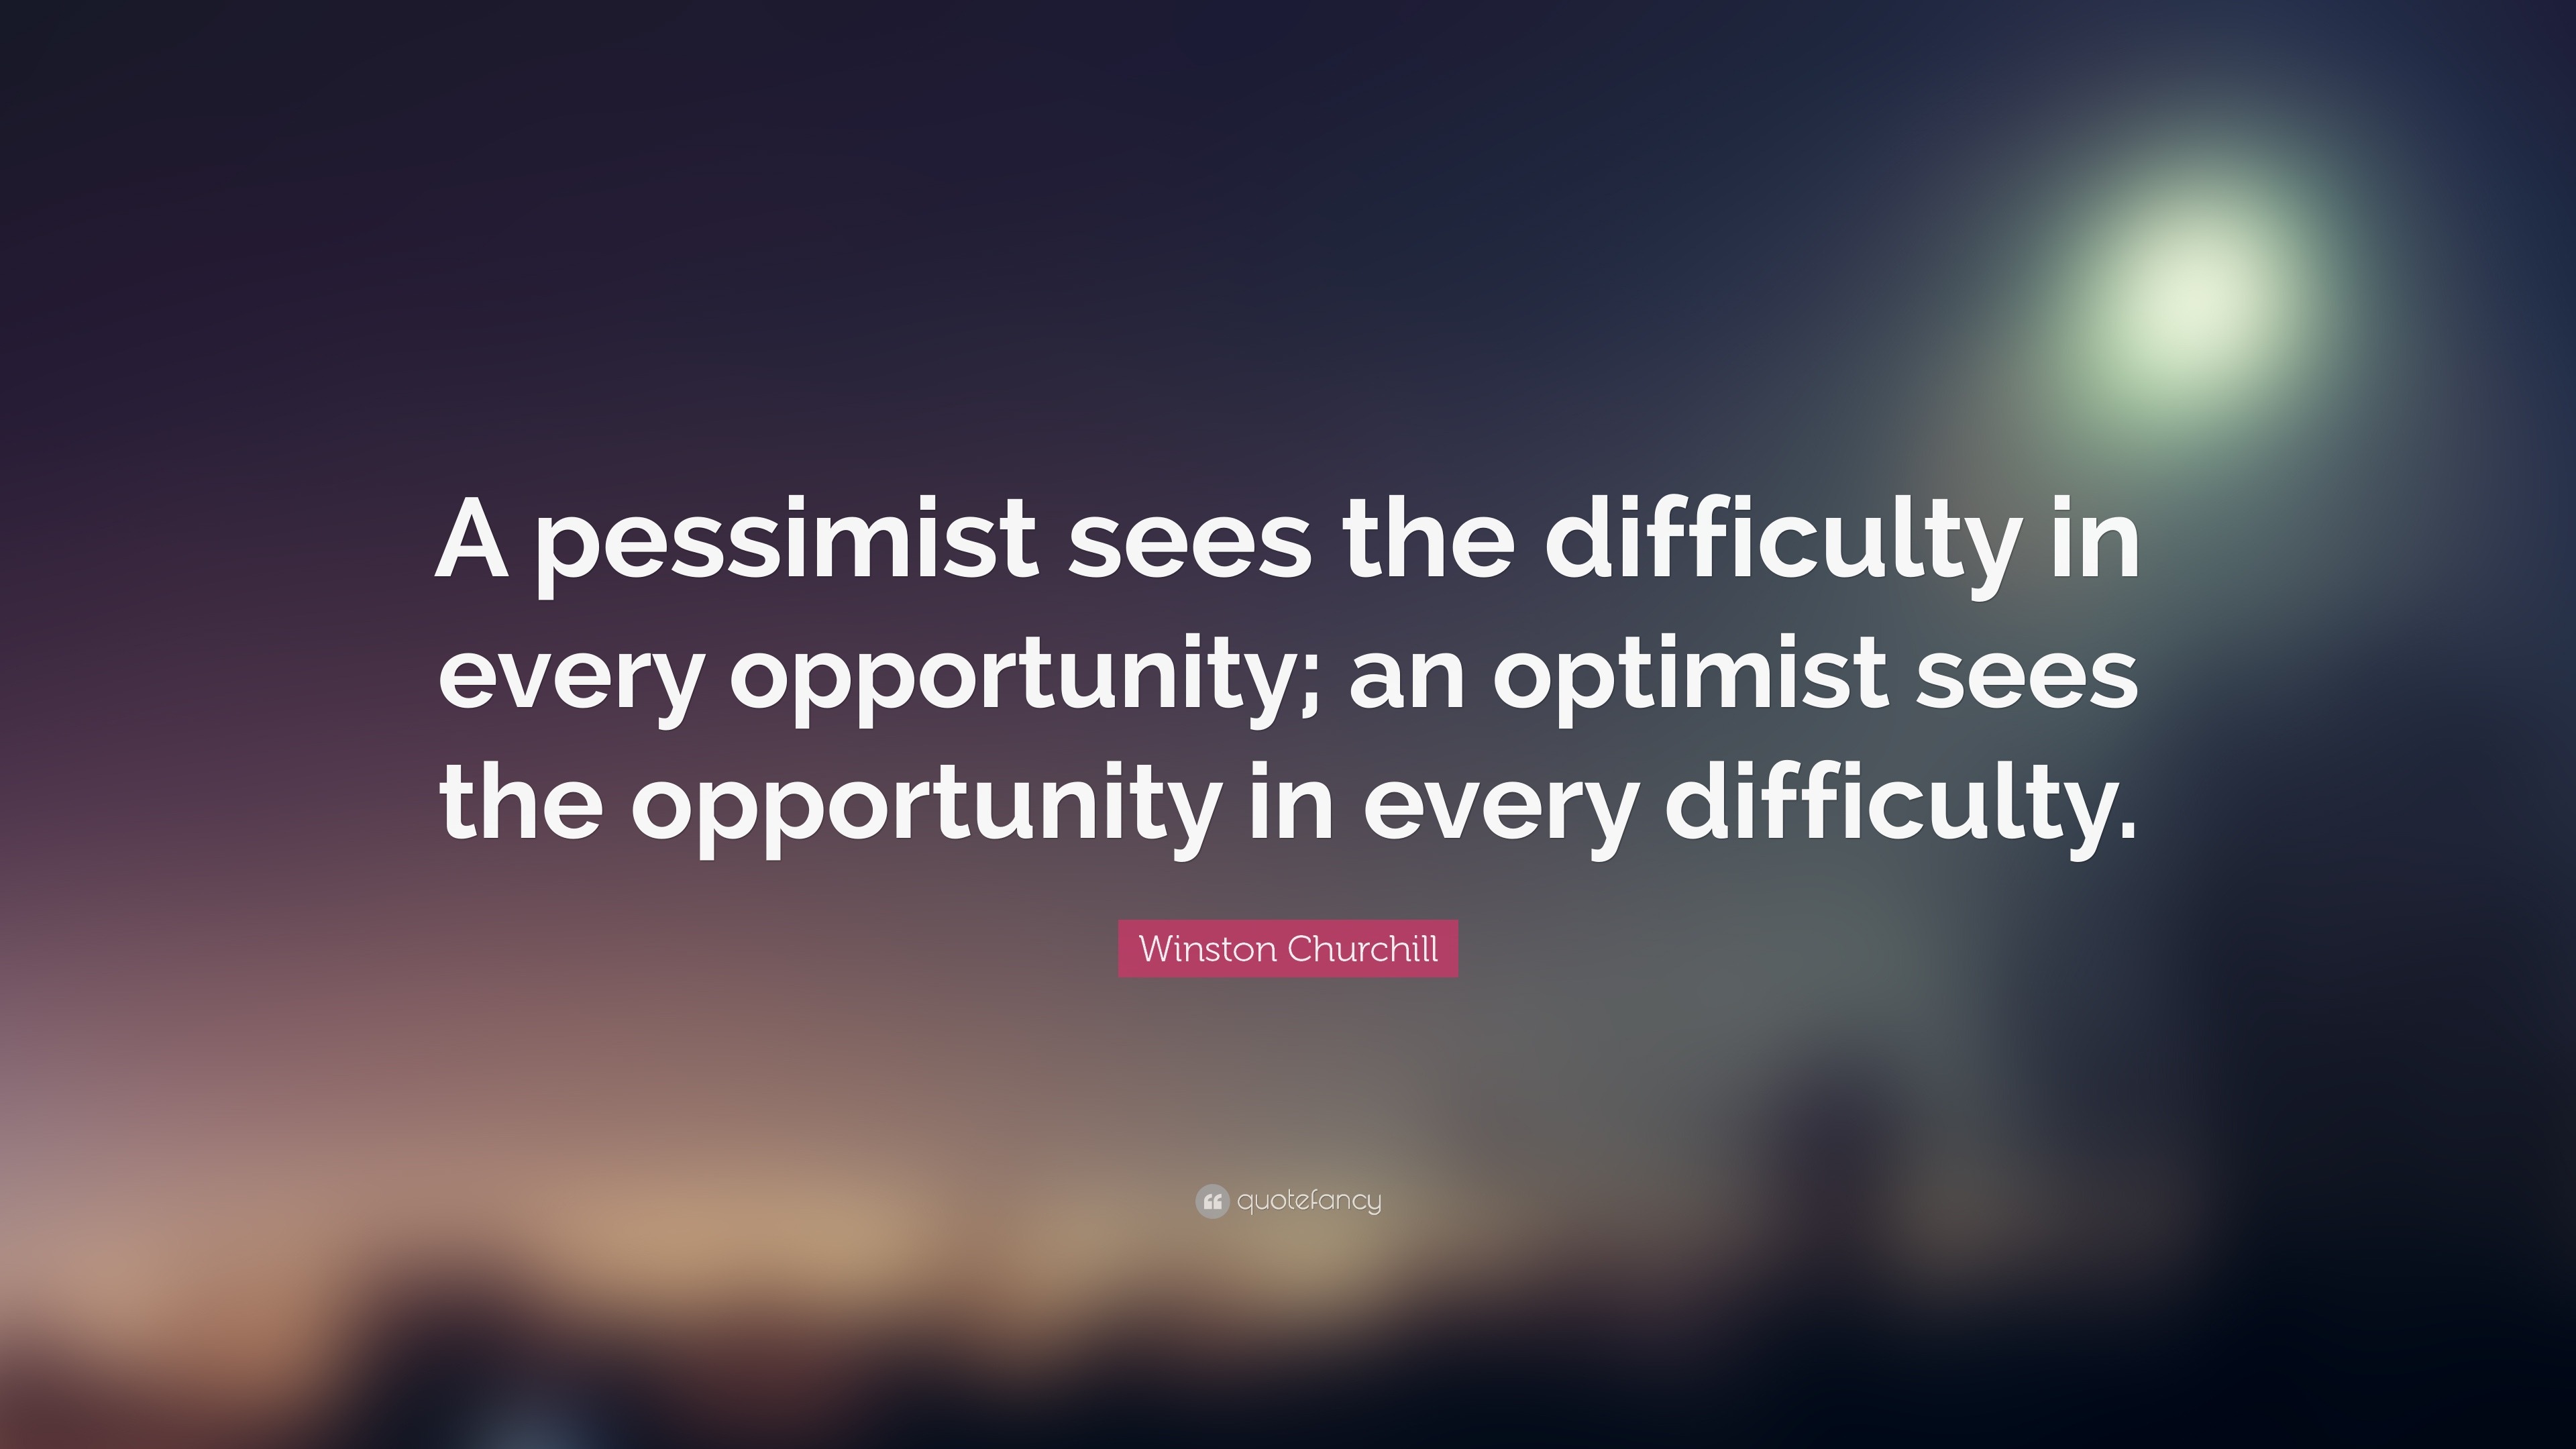 Winston Churchill Quote: “A pessimist sees the difficulty in every